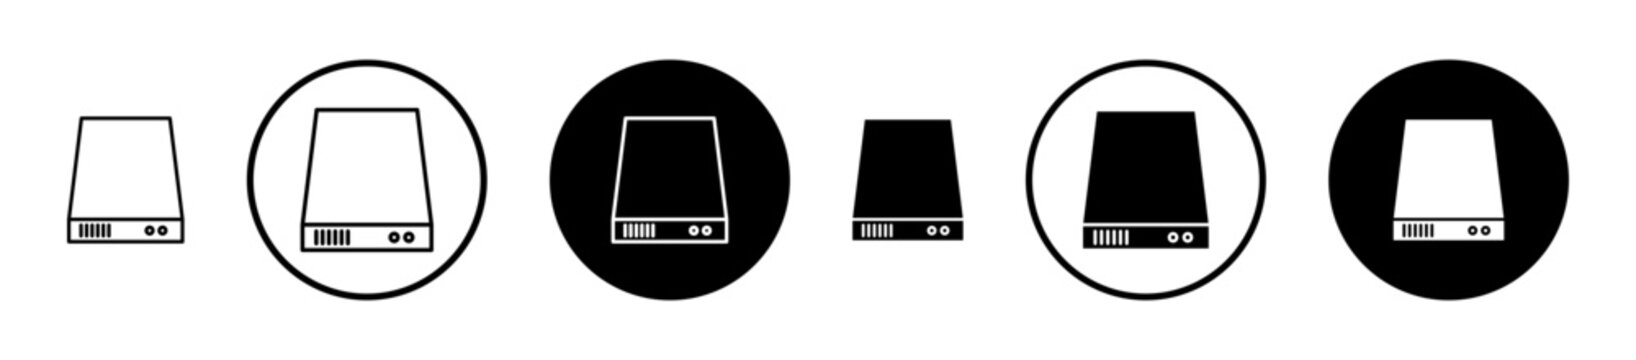 Hard Disk vector icon set. internal memory drive storage icon suitable for apps and websites UI designs.